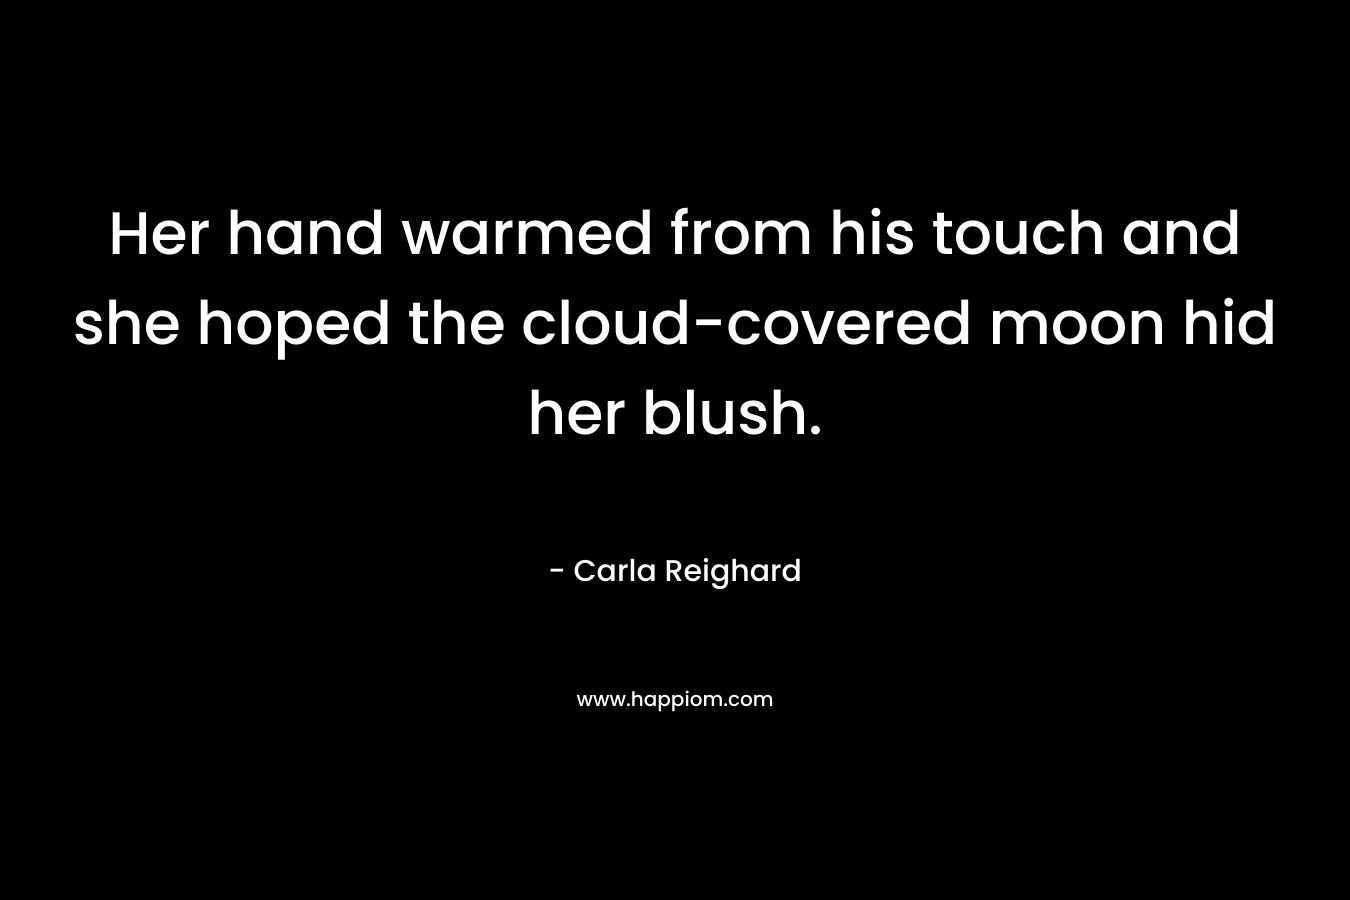 Her hand warmed from his touch and she hoped the cloud-covered moon hid her blush. – Carla Reighard